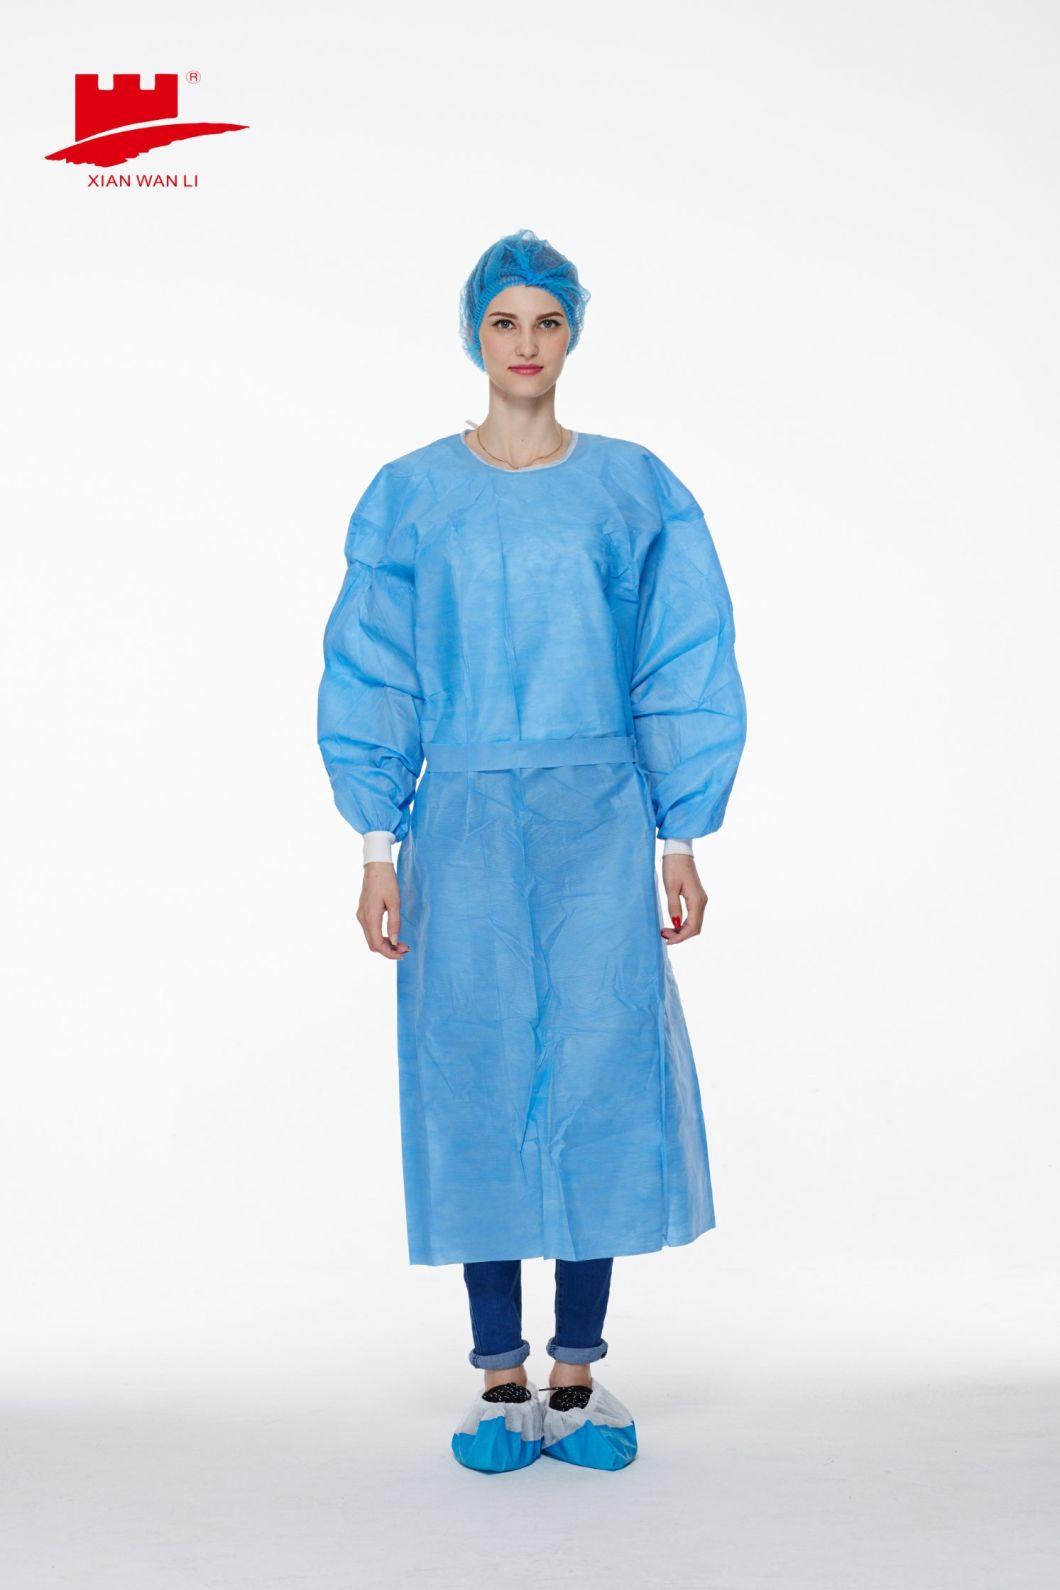 SMS Isolation Gown Level 2 3 4 45g Isolation Gown White Blue AAMI Level 3 Isolation Gown